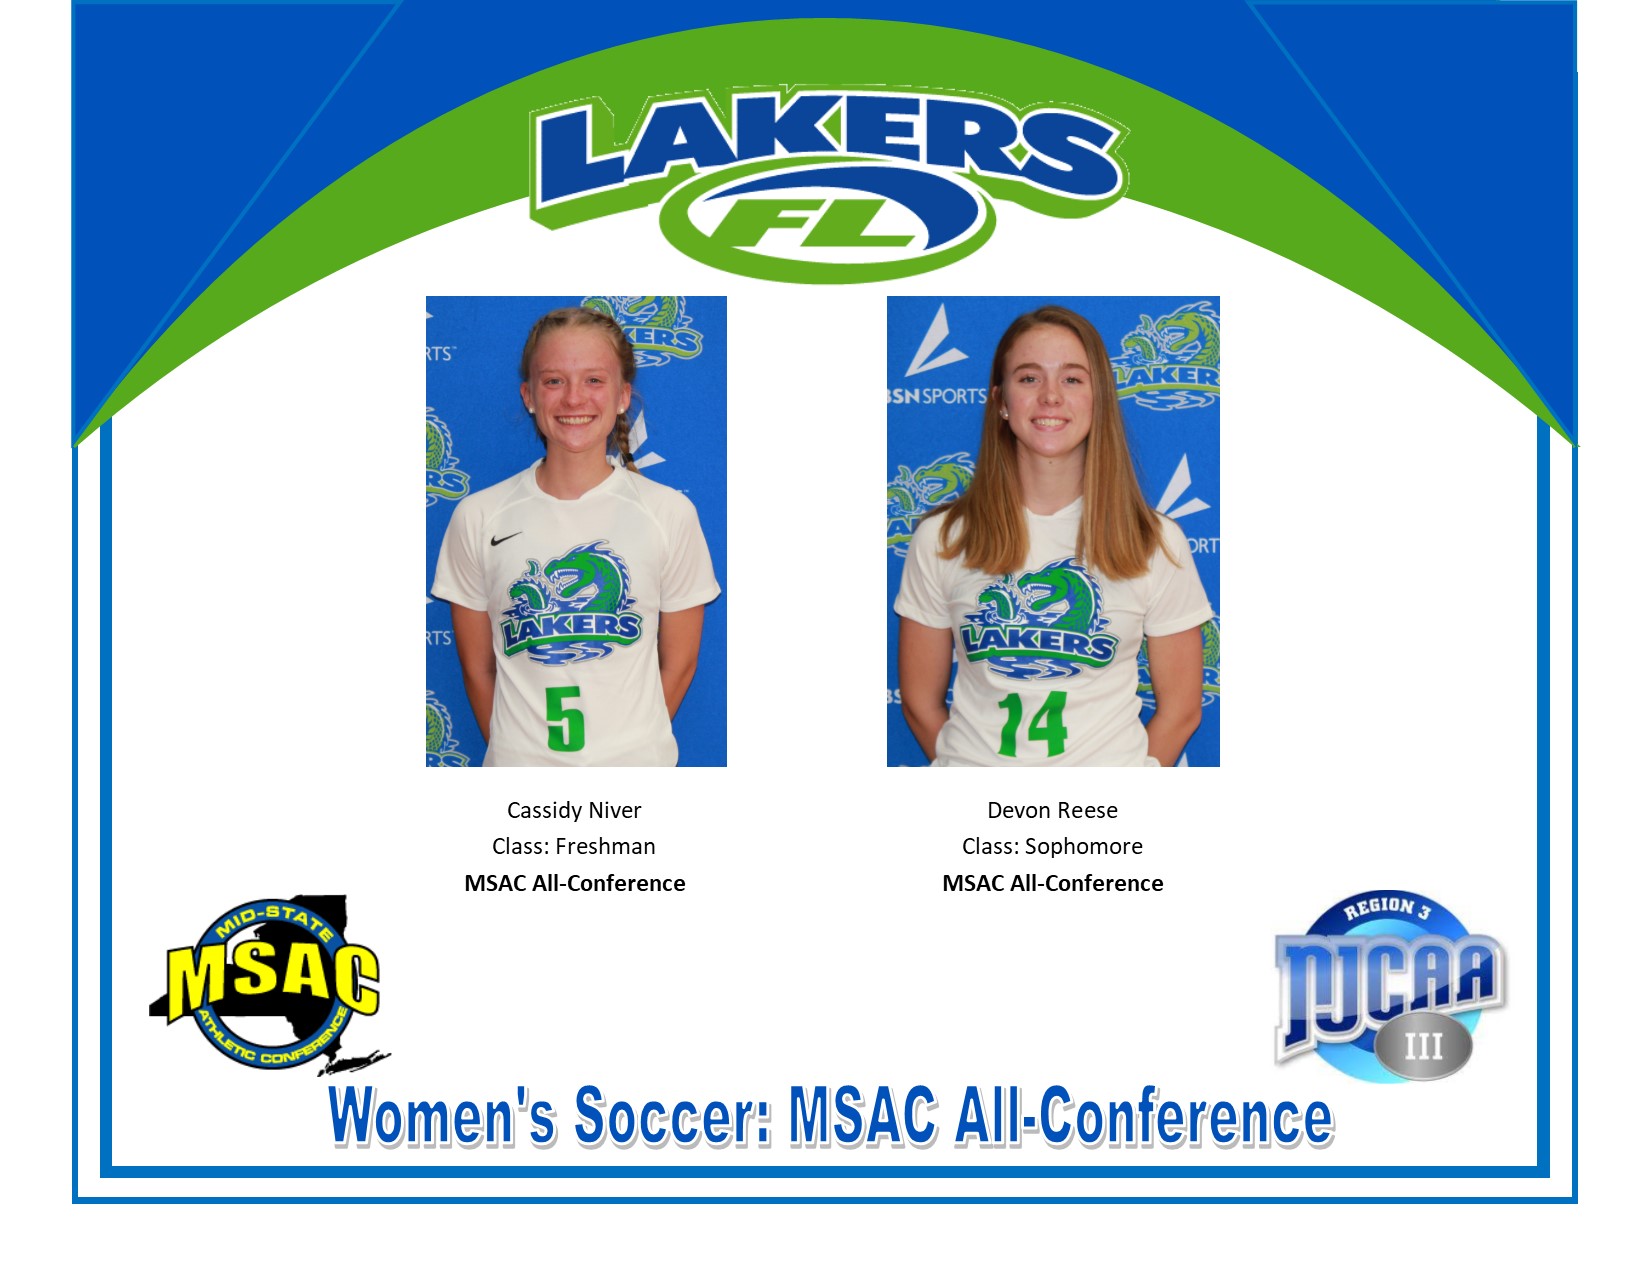 Niver, Reese, Named to the 2019 Women's Soccer MSAC All-Conference Team